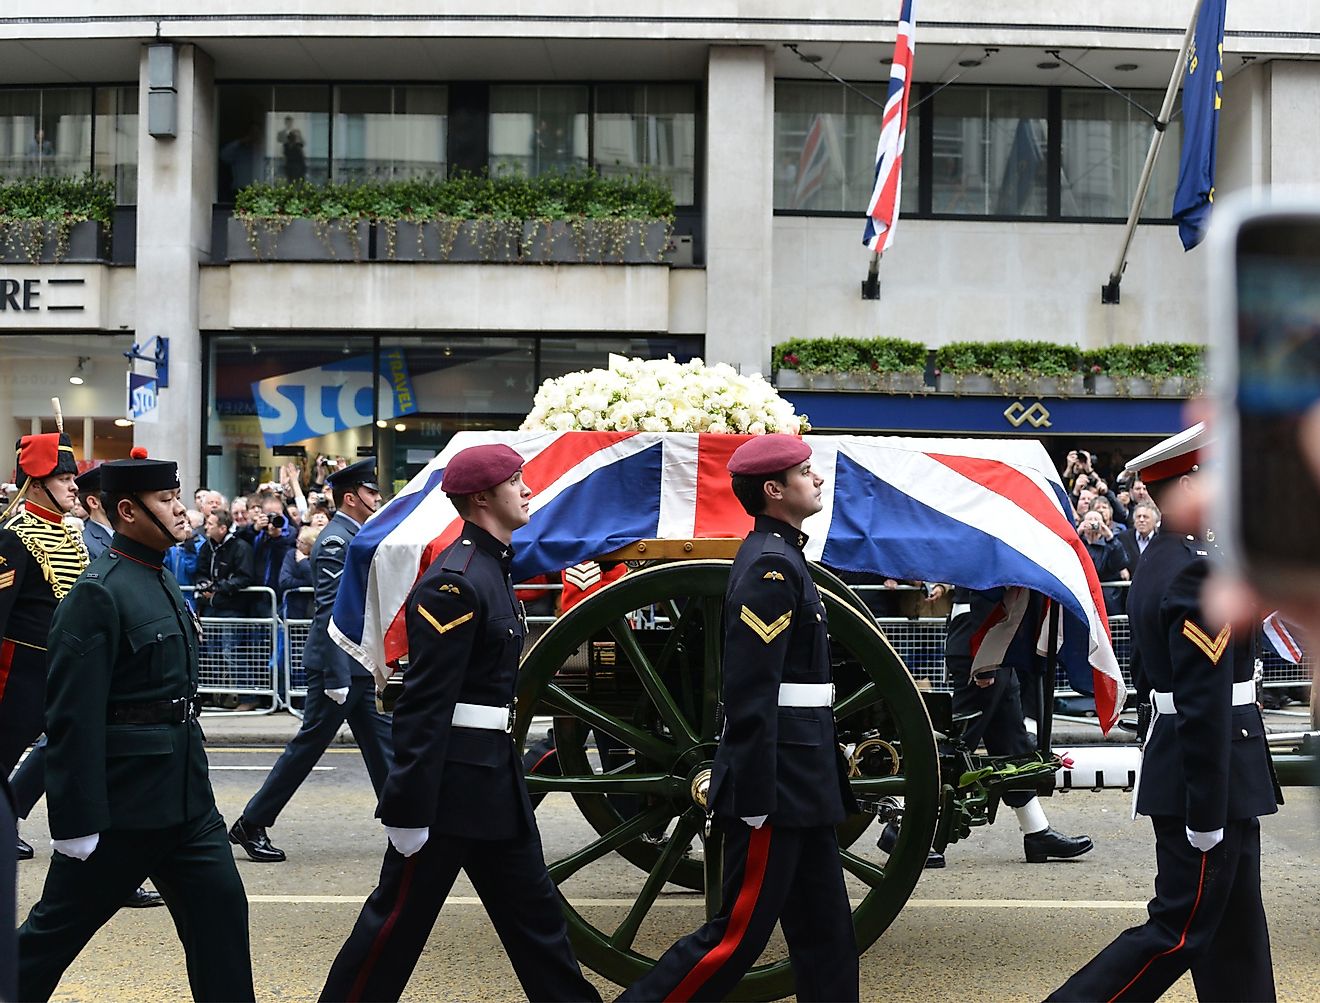 Thatcher's coffin on its way to St Paul's Cathedral, on April 17, 2013 in London. Image credit Thomas Dutour via shutterstock